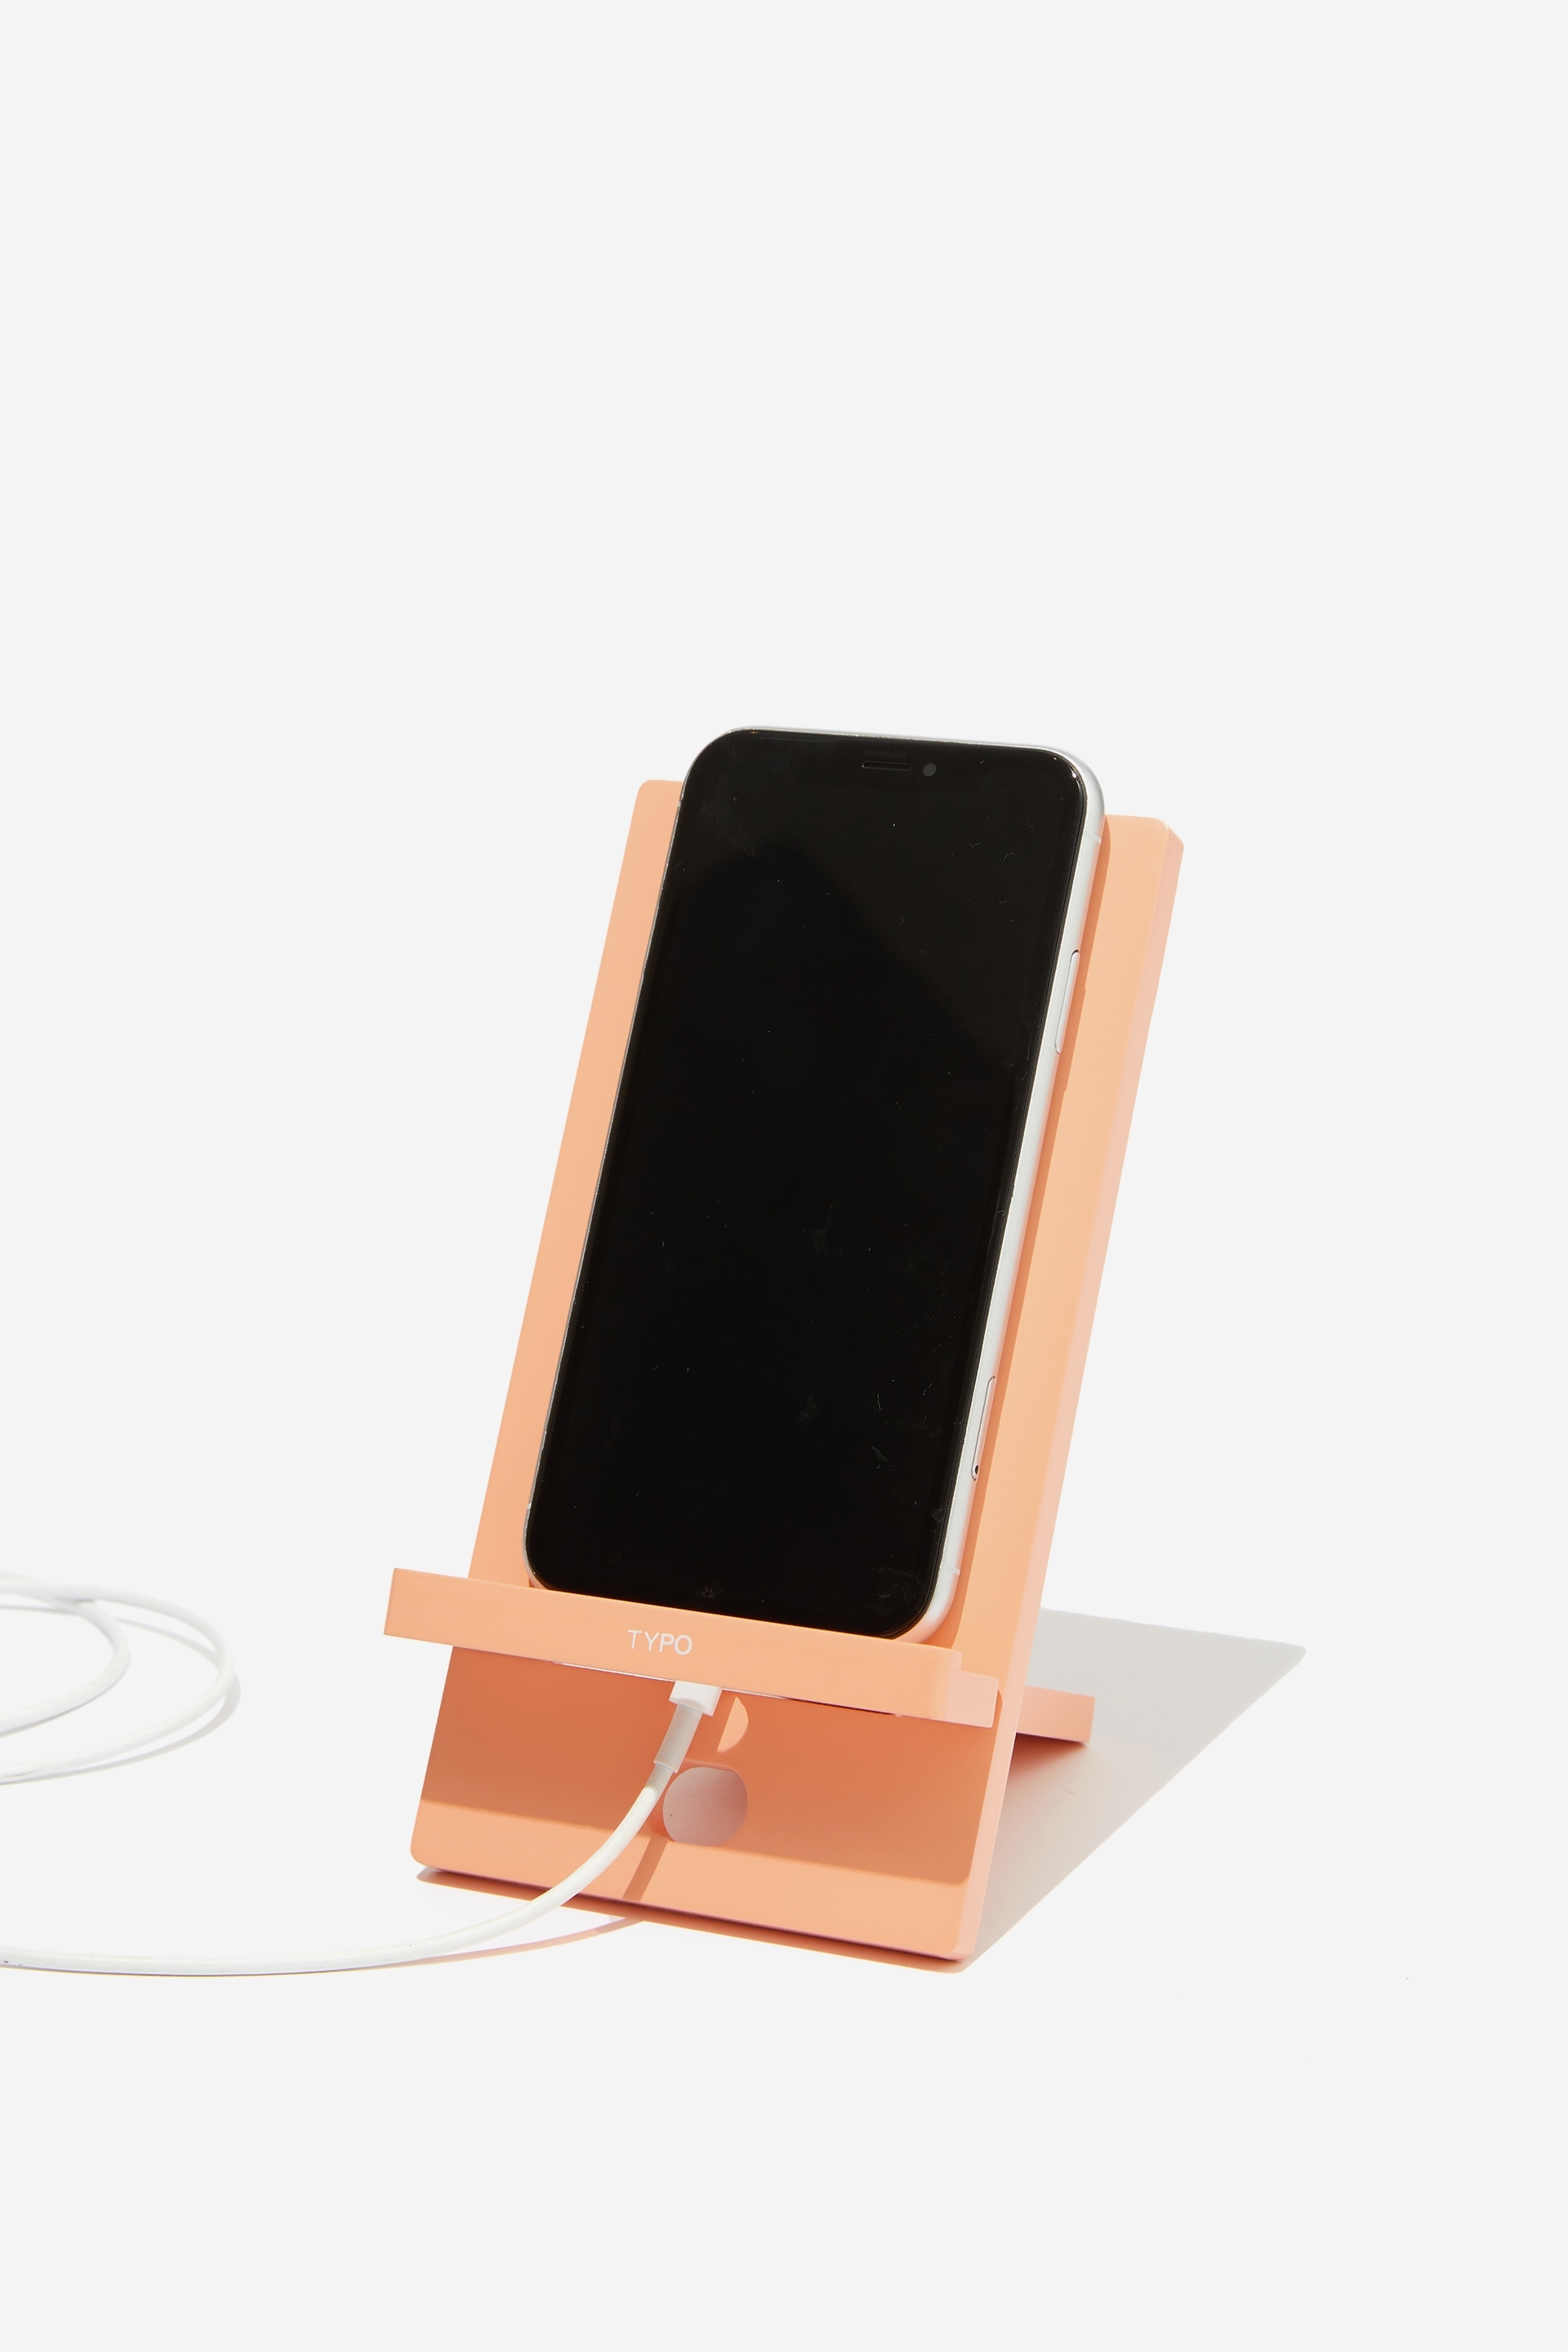 Typo - On Hold Phone Stand - Apricot crush